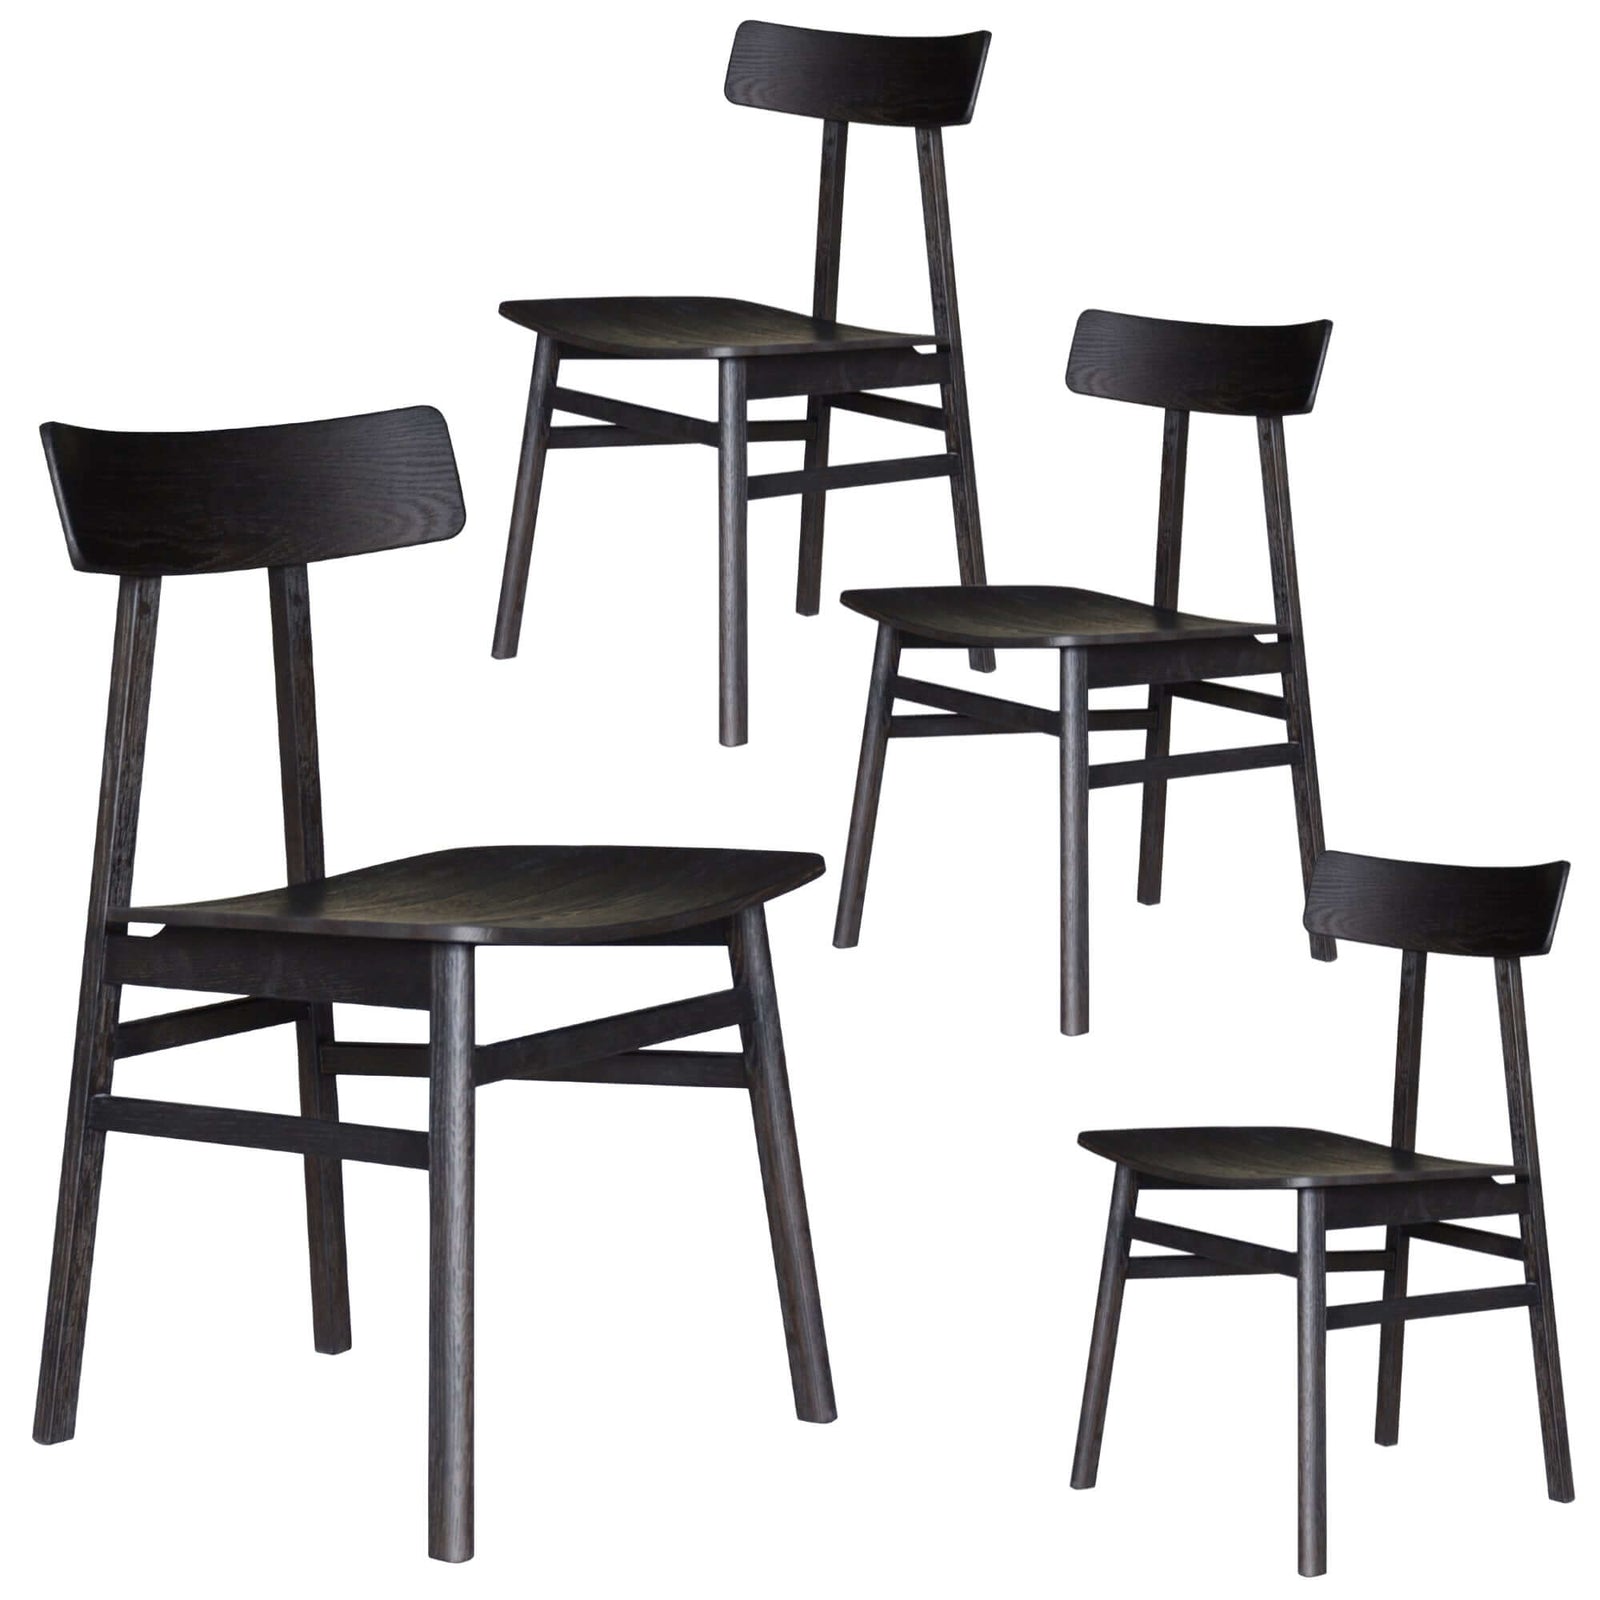 Claire Dining Chair Set of 4 Solid Oak Wood Timber Seat Furniture - Black-Upinteriors